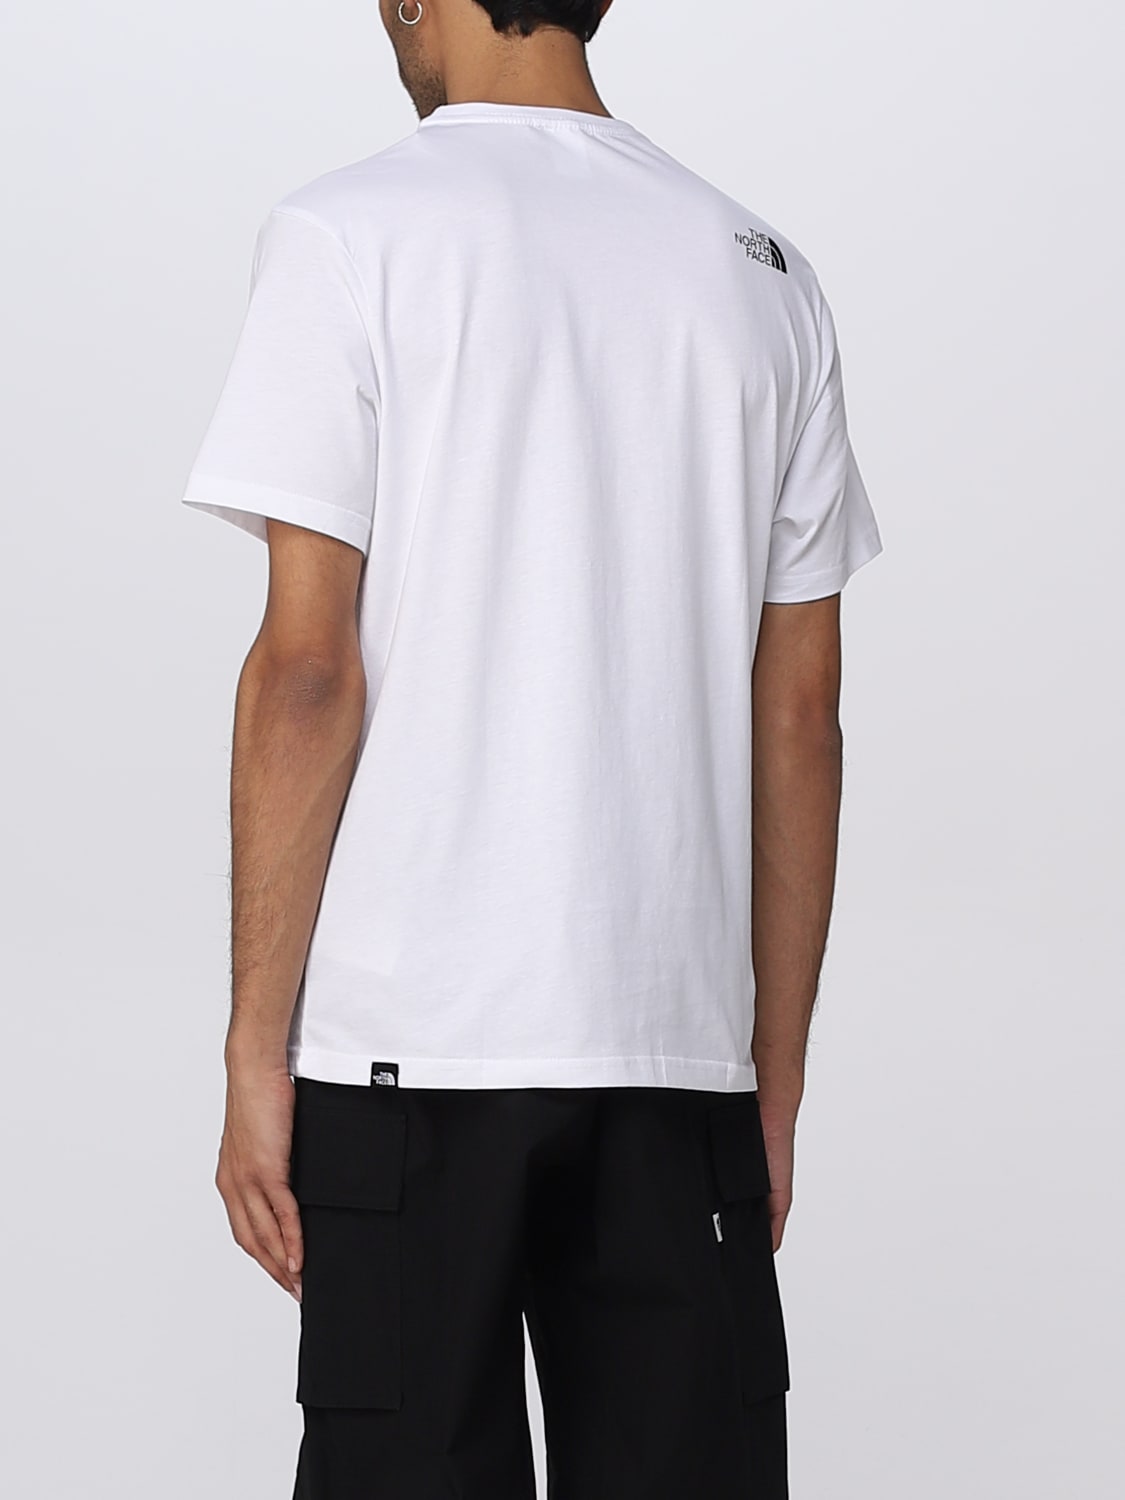 THE NORTH FACE: t-shirt for man - White | The North Face t-shirt NF0A4SZU  online at